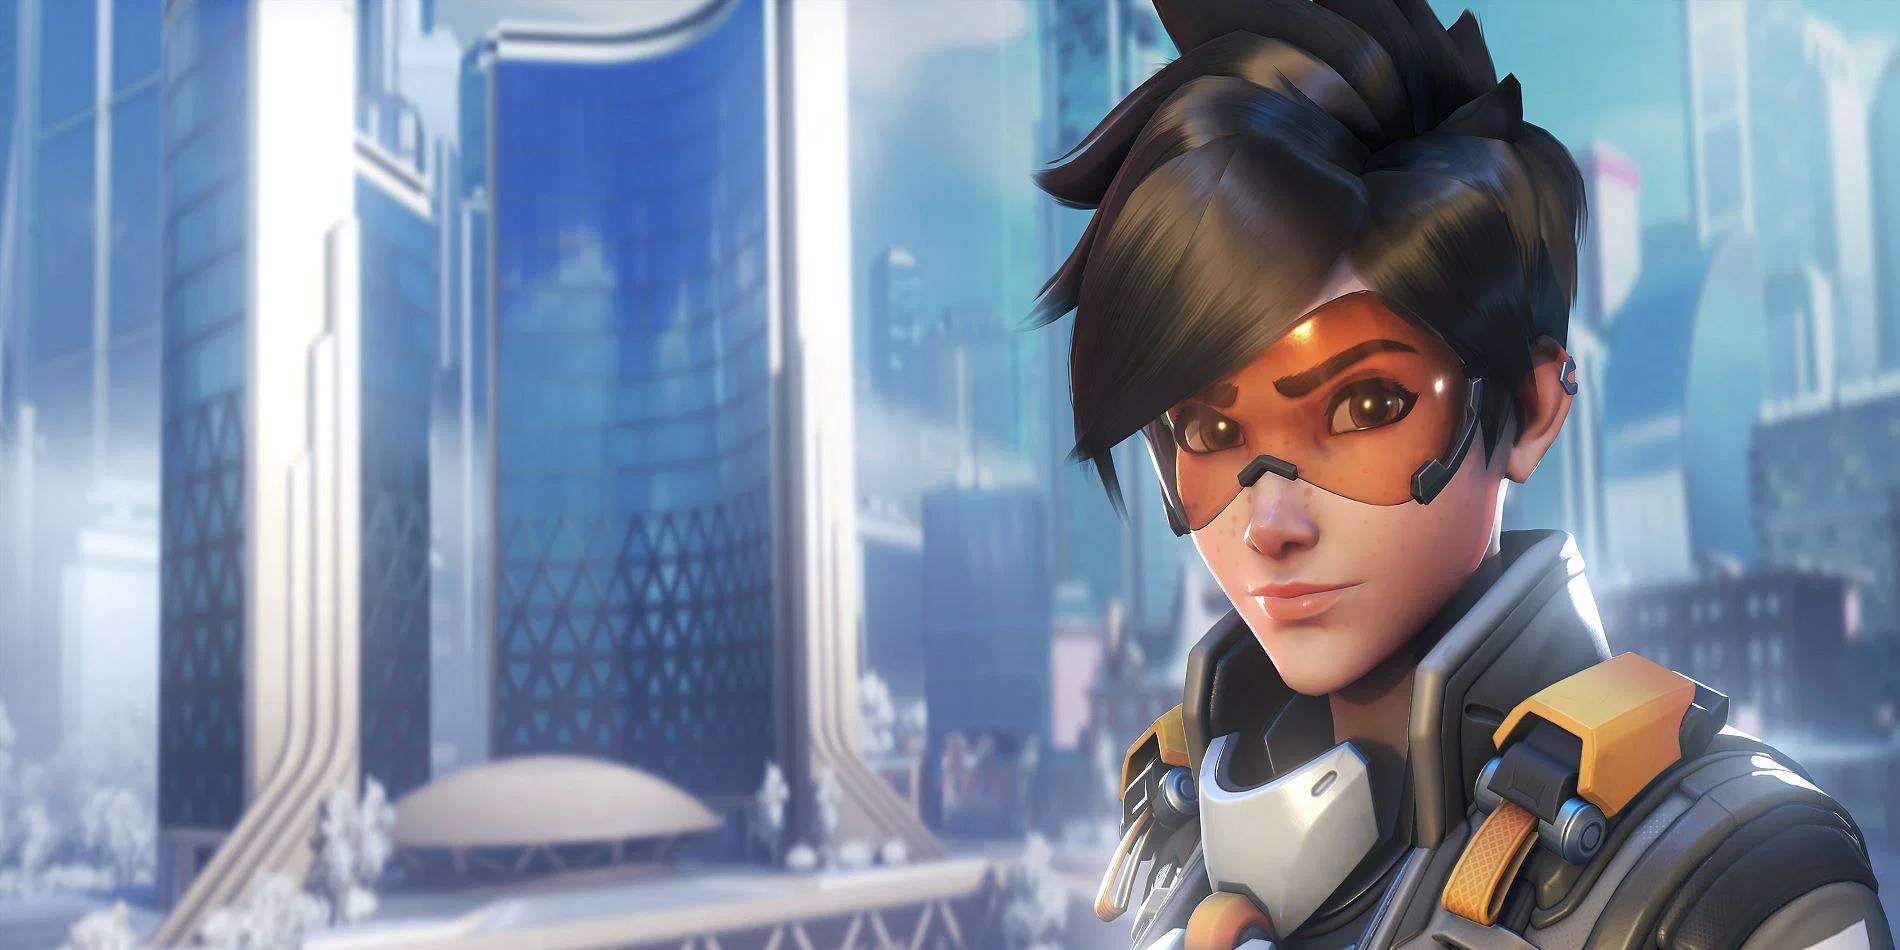 Overwatch 2 Tracer Character Select Screenshot Next to Overview of New Map